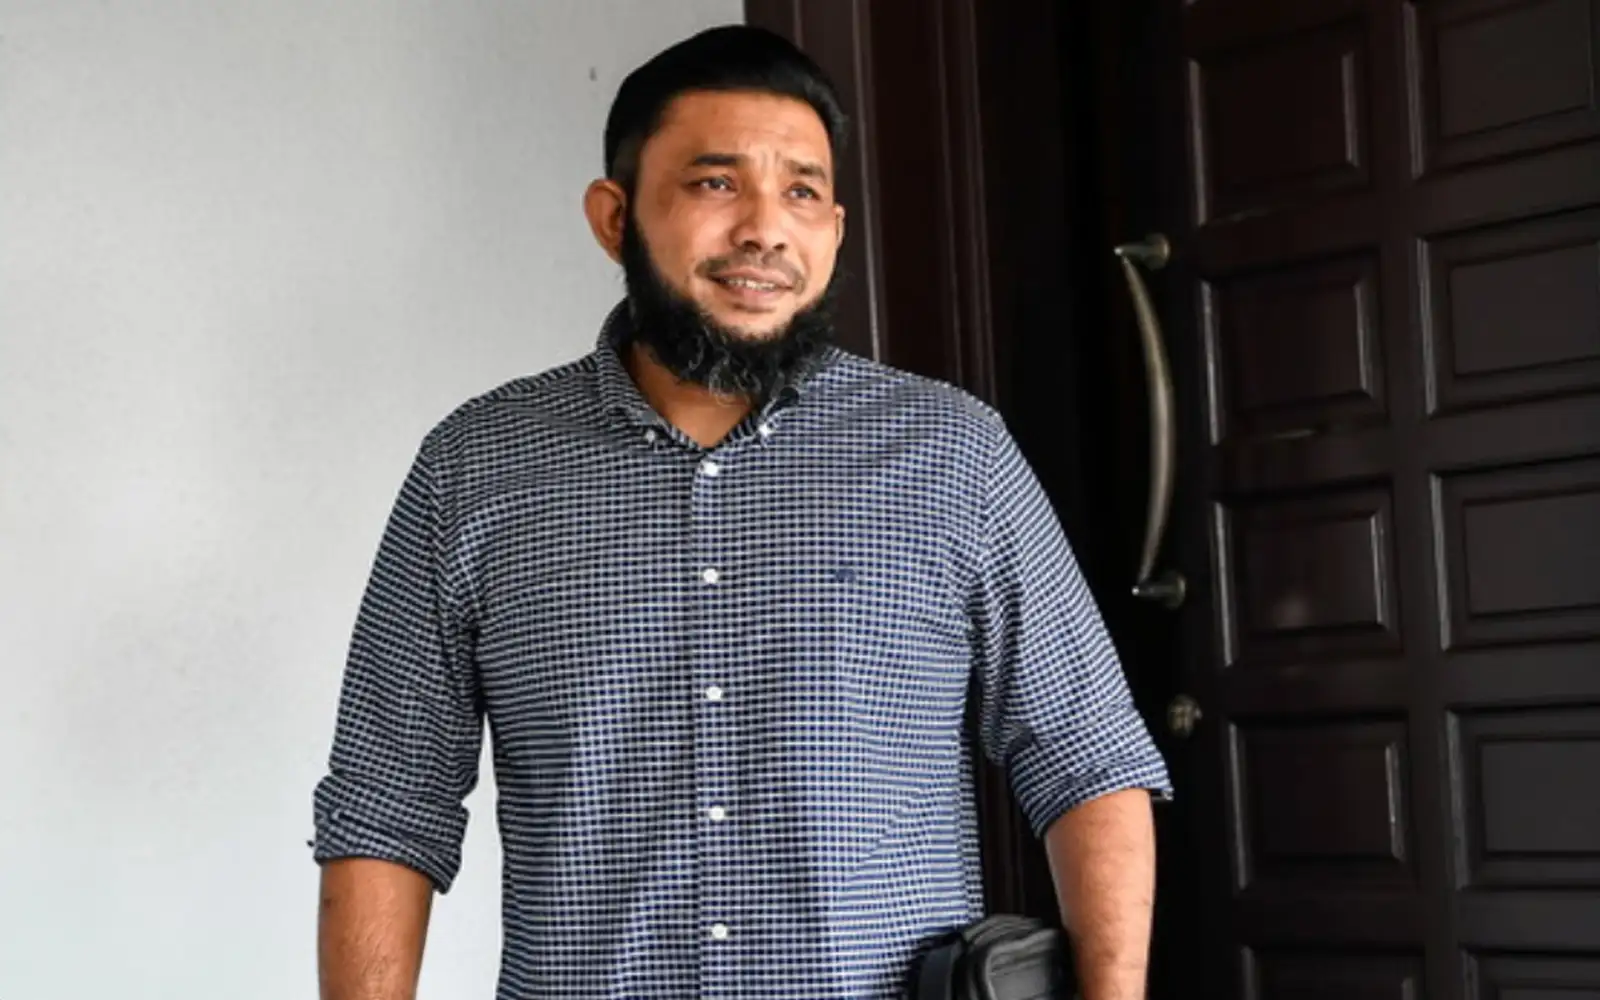 papagomo remanded for 2 days, says lawyer